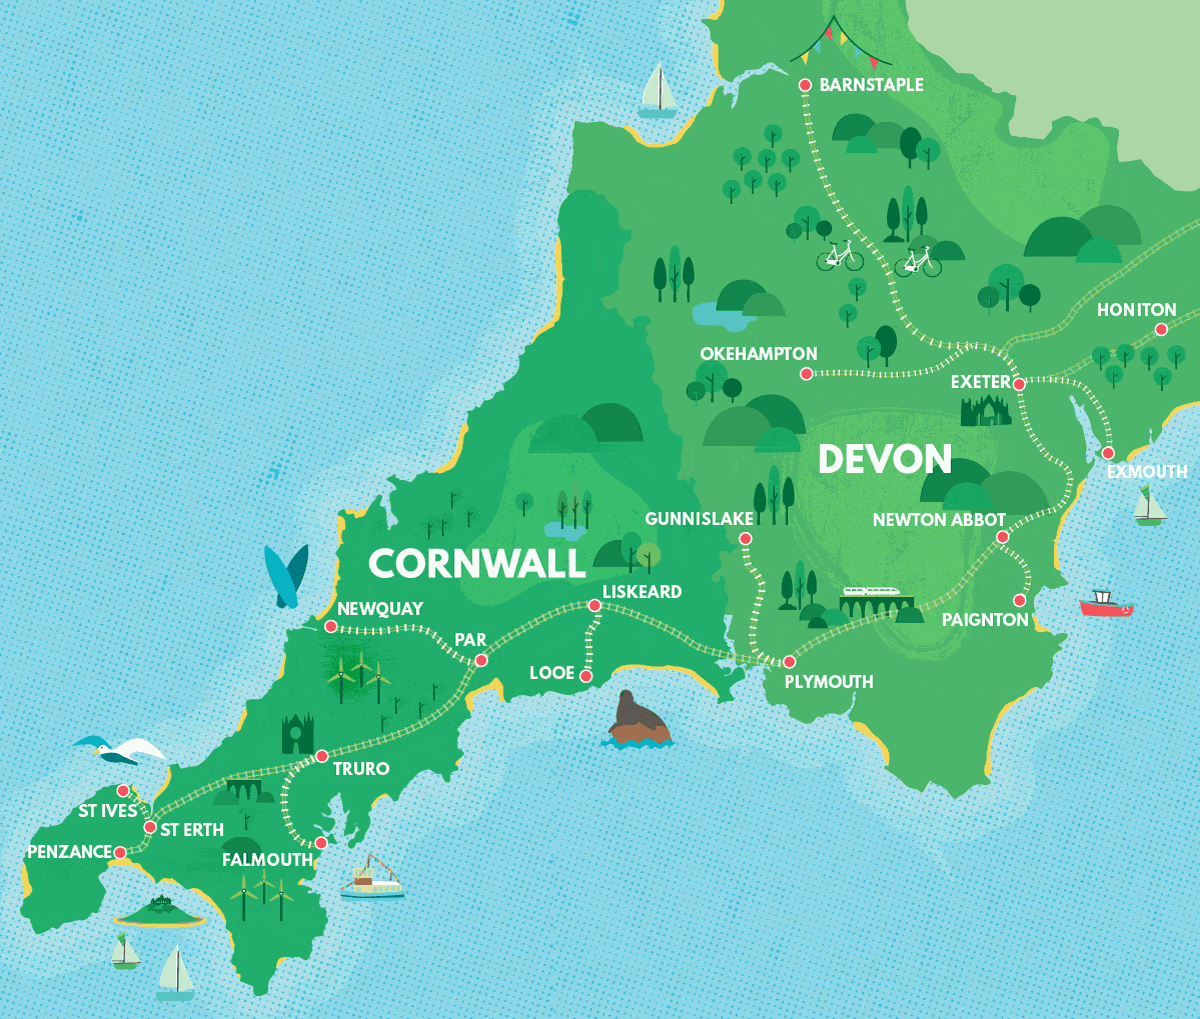 Overview map of Devon and Cornwall's rail network